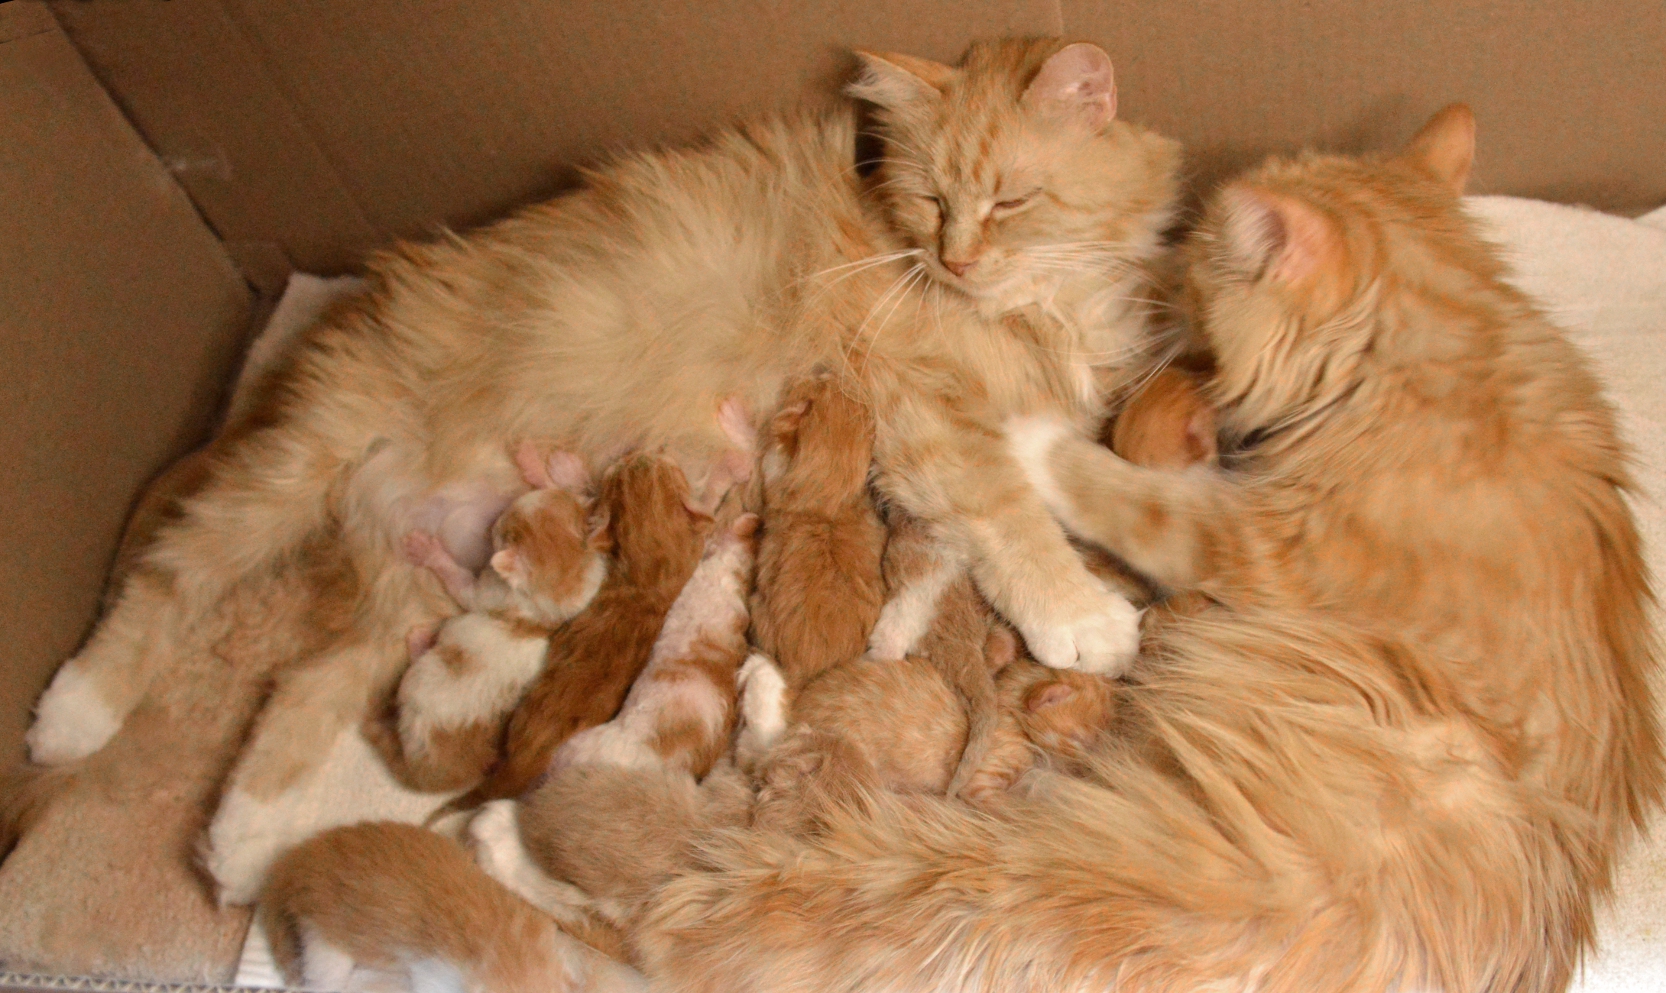 Solveig and Angelique with their 10 kittens